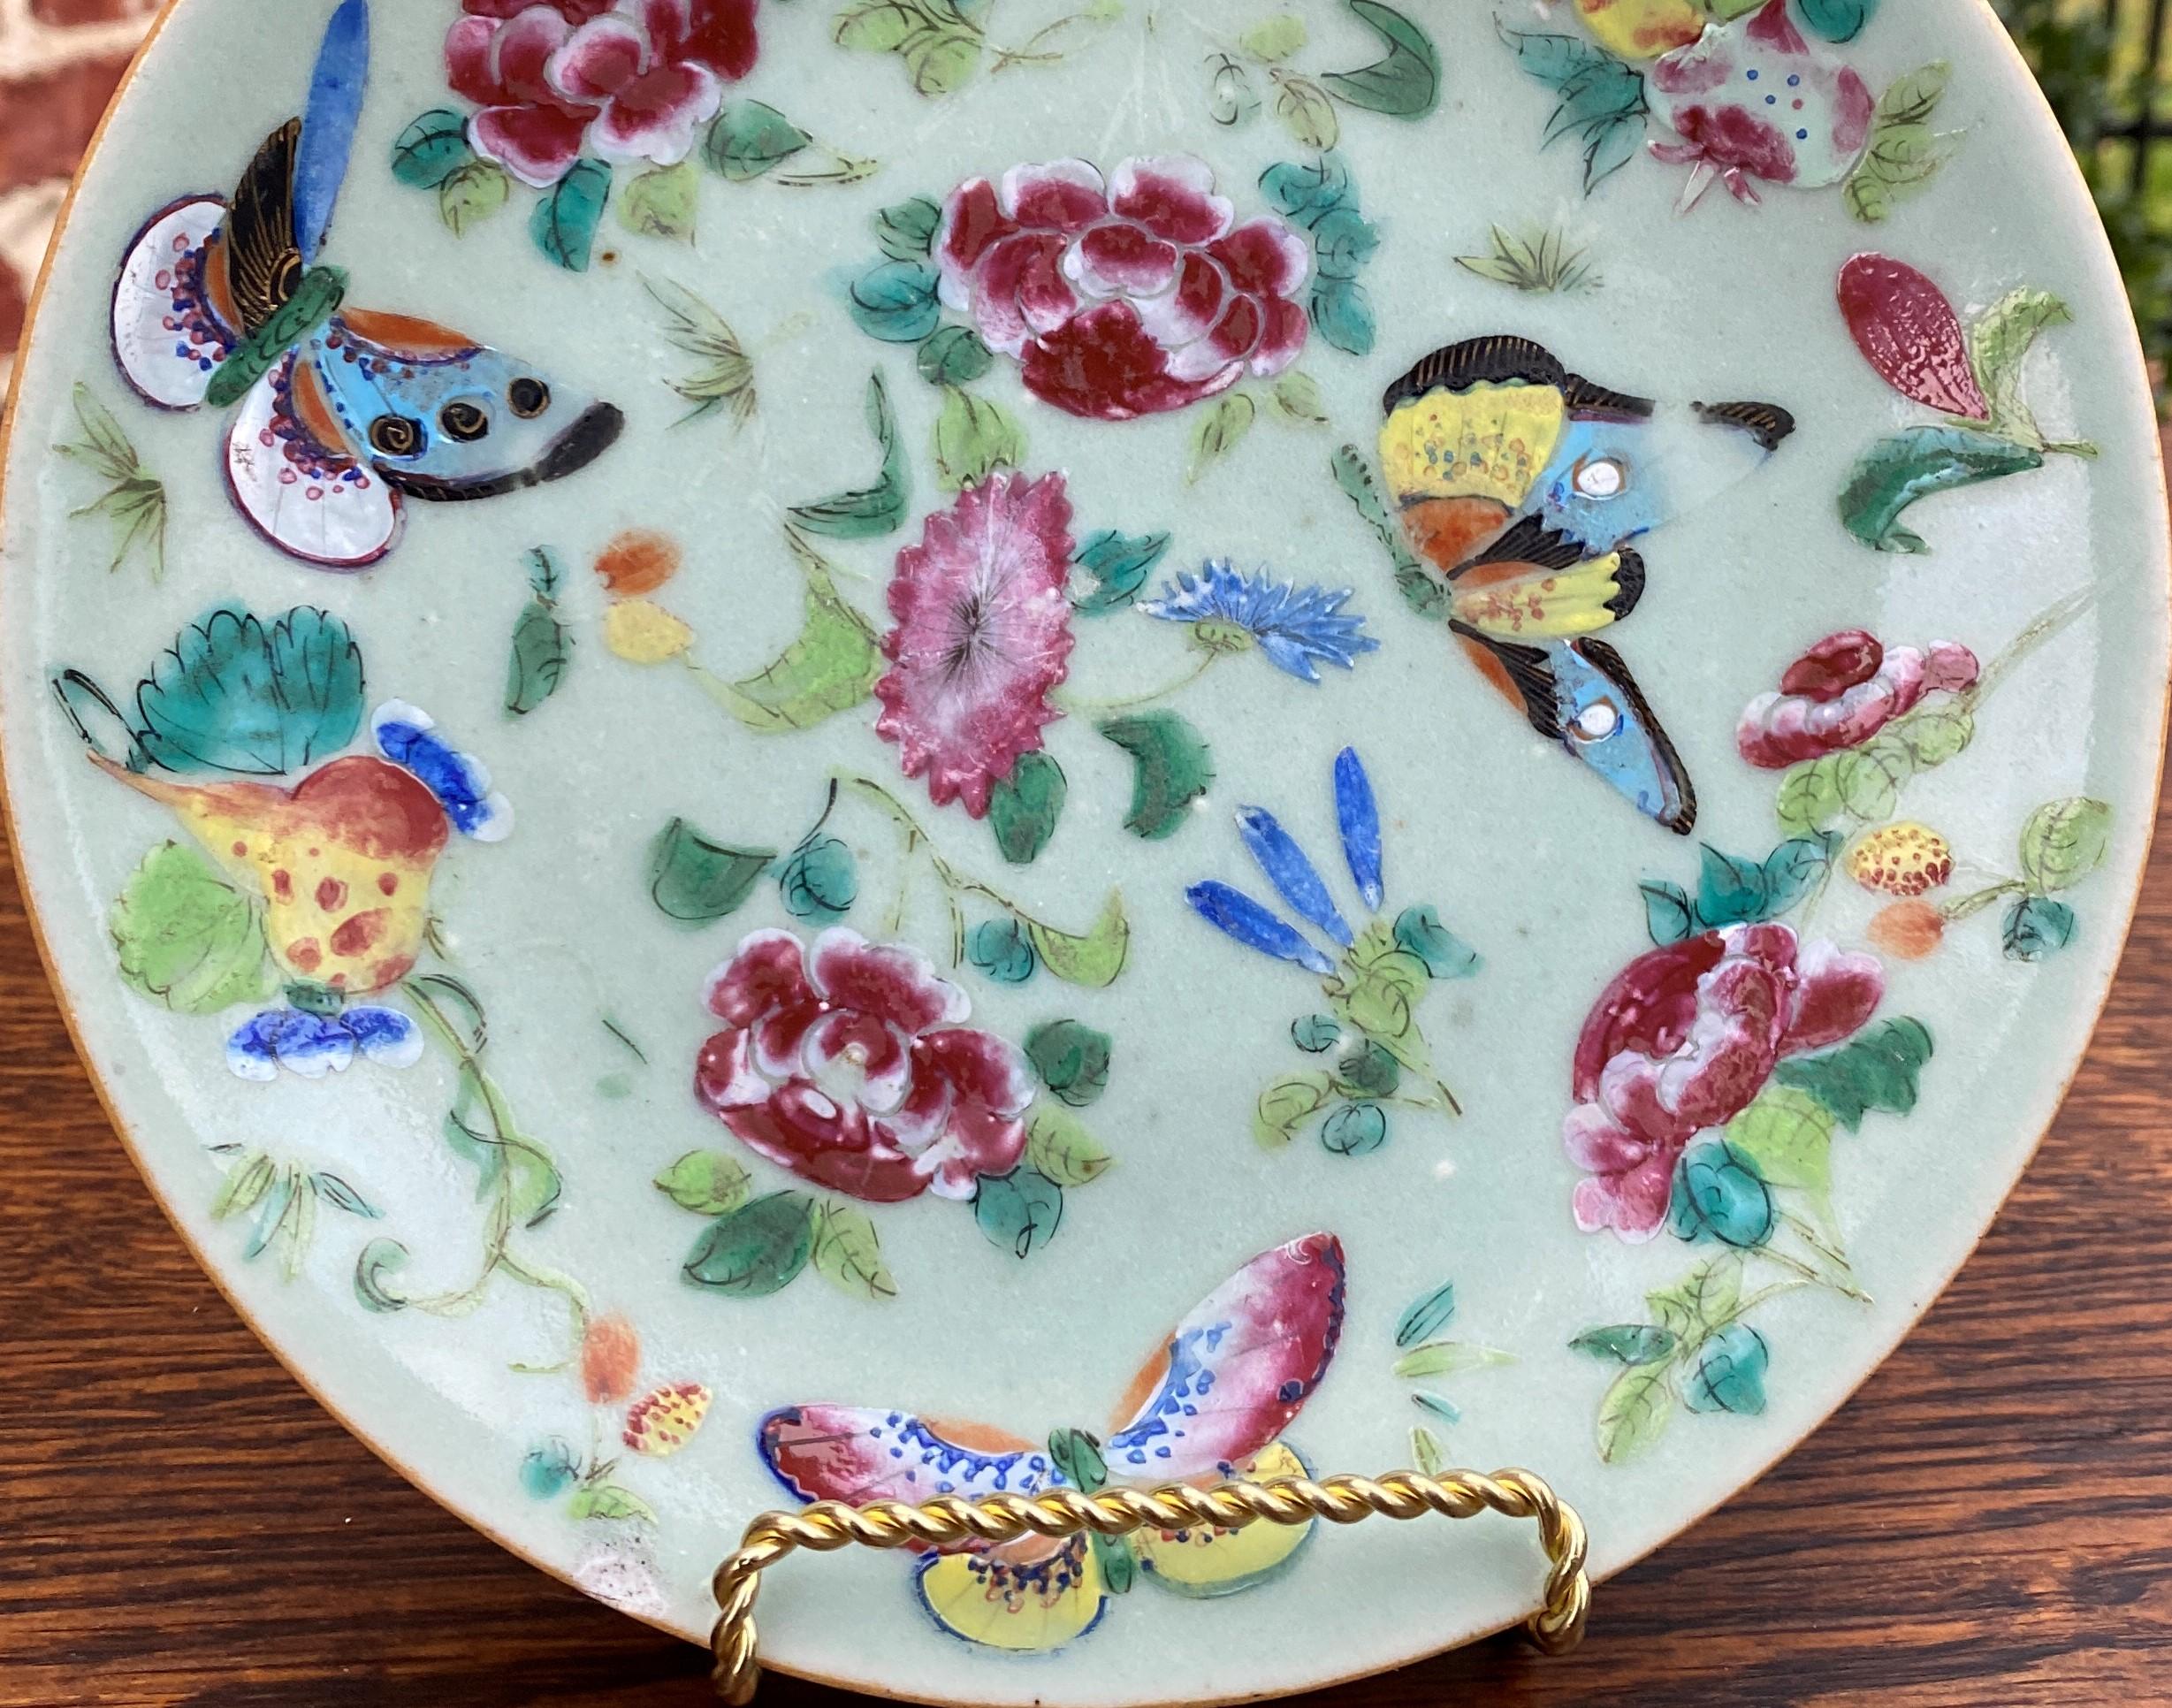 Antique Chinese Celadon Plate #1~~Famille-Rose Palette~~Qing Dynasty~~c. 1820s

Beautiful antique Chinese (Canton) Celadon plate~~light green Celadon glaze with beautifully hand painted decoration in over-glaze poly-chrome enamels of the